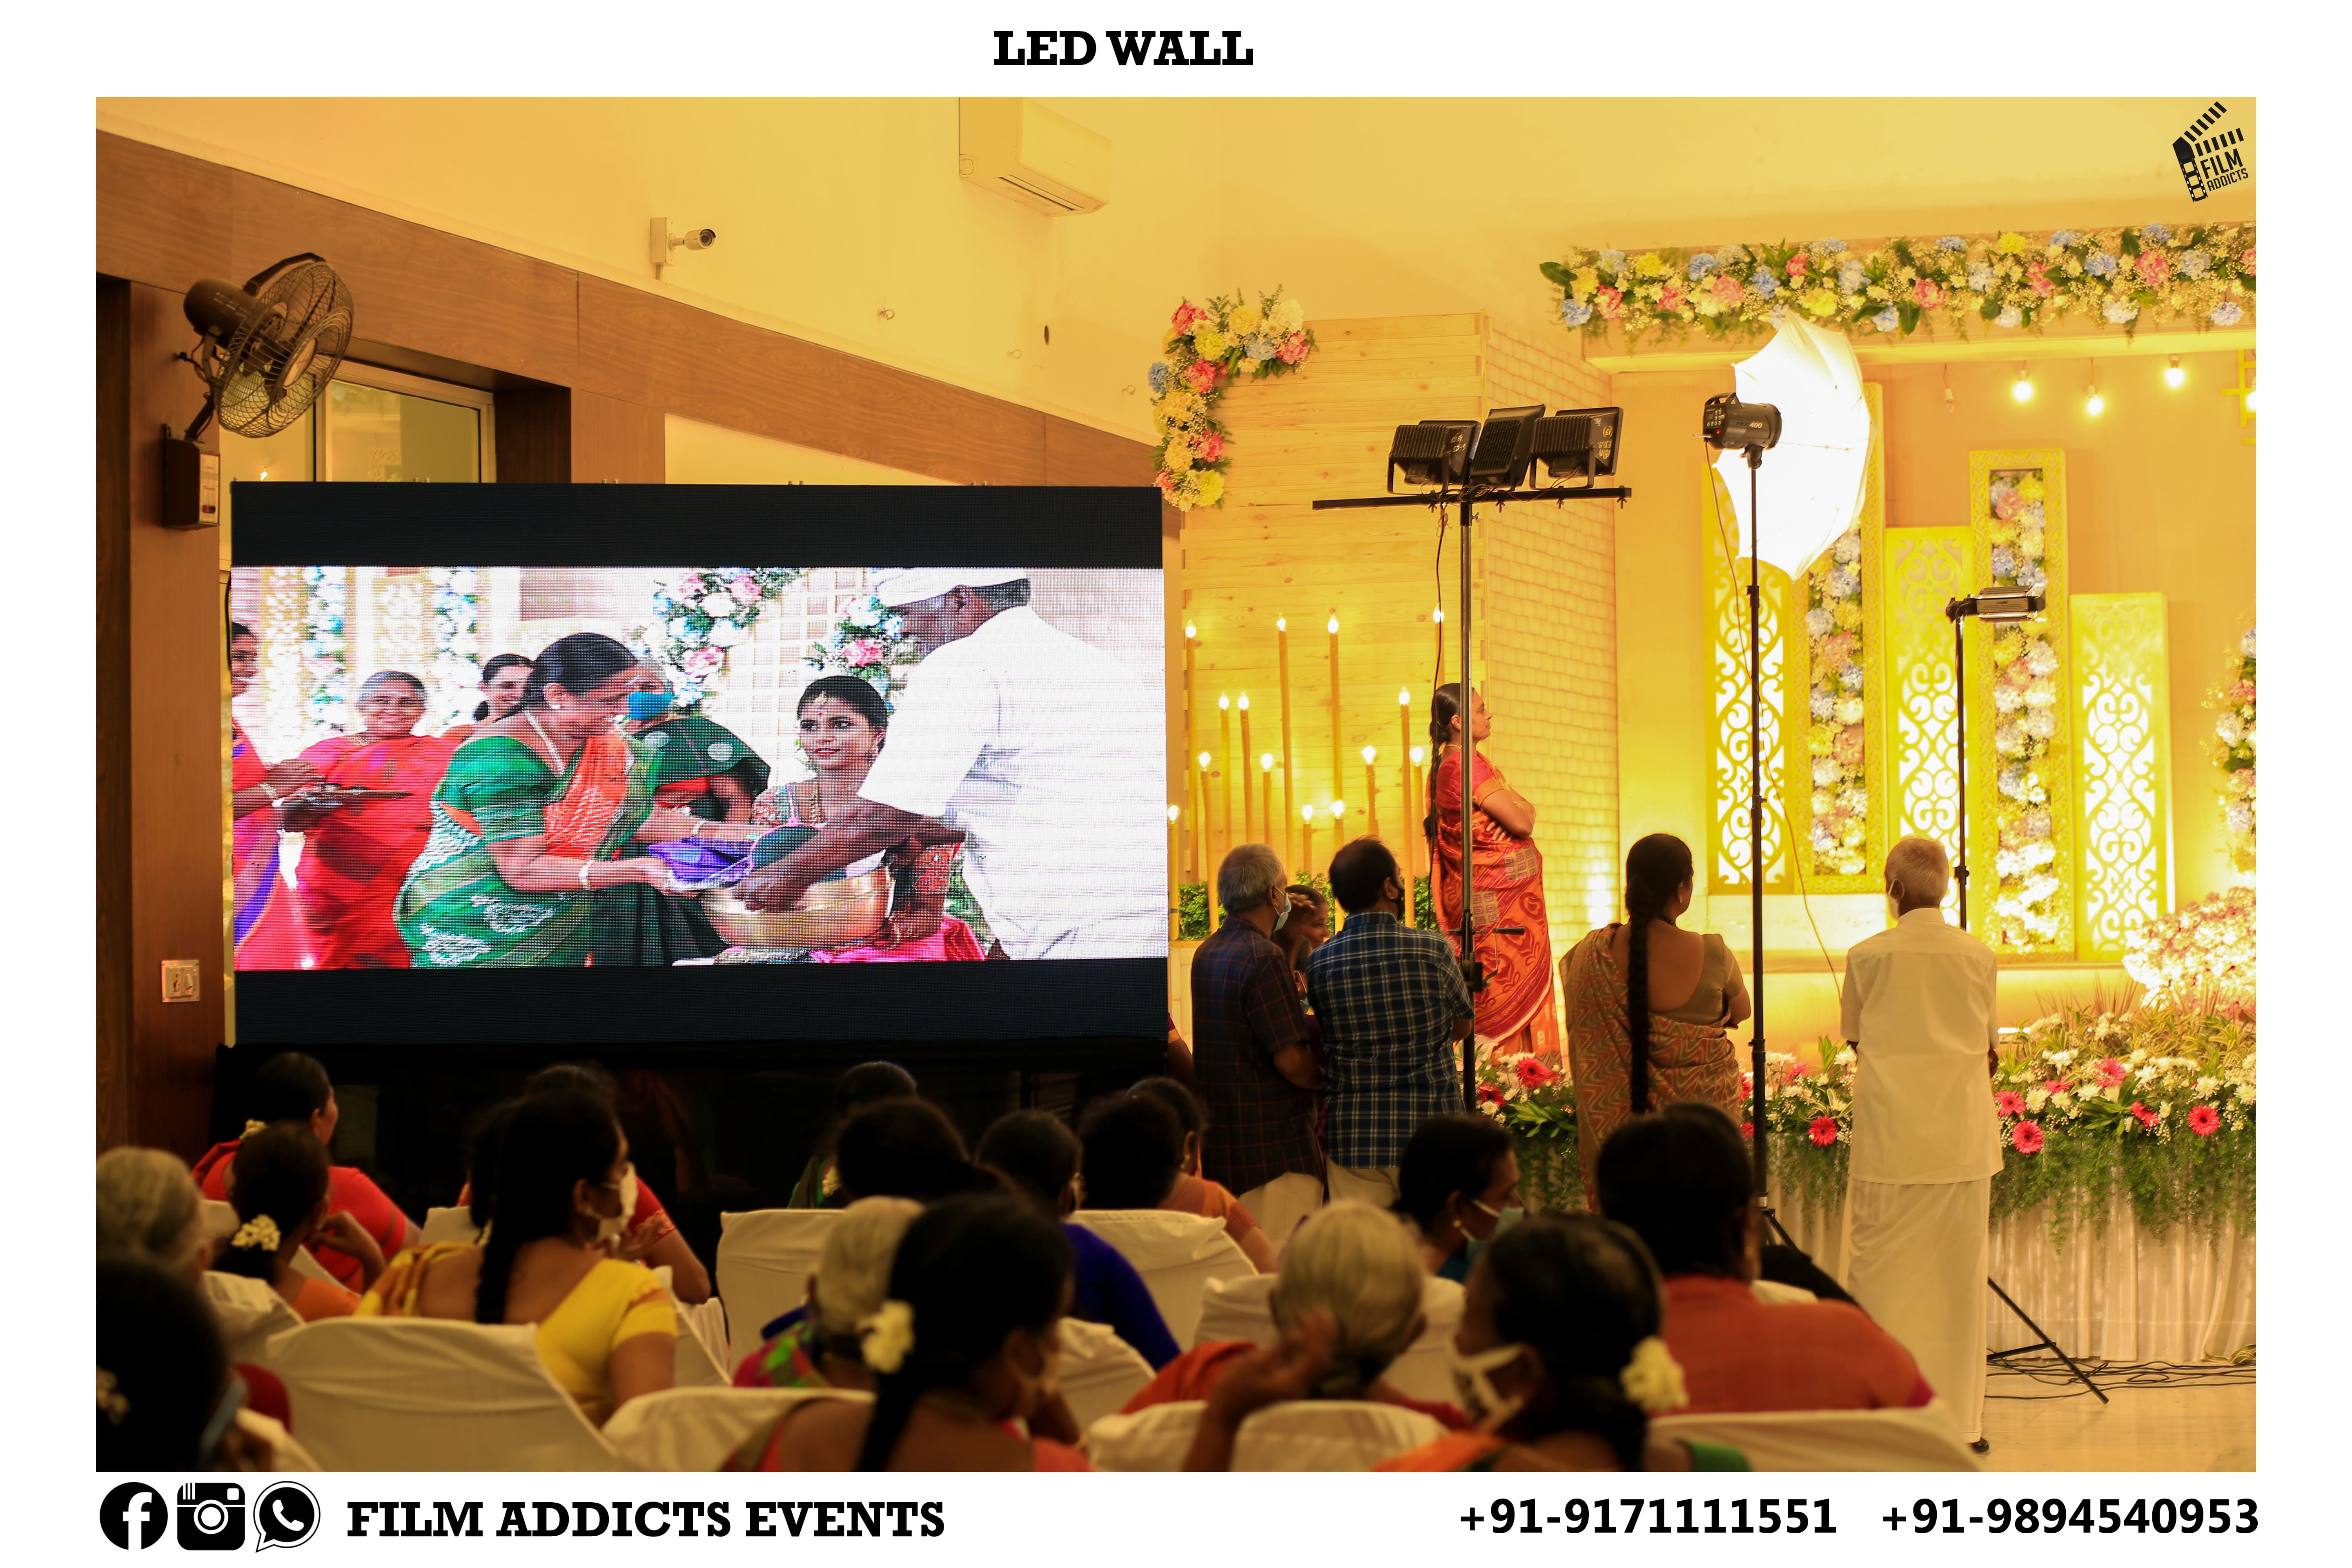 Best LED Video Wall Rentals in Virudhunagar, Best LED Wall Services In Virudhunagar ,Best LED Wall Rental Services In Virudhunagar, Best Budget LED Wall Rental  Services in Virudhunagar, Best Wedding LED Wall Rentals In Virudhunagar, Best clarity in led wall rentals in Virudhunagar, Best cost-effective display rentals in Virudhunagar, Best crisp, bright, high resolution led video services in Virudhunagar, Best led wall rental services in Virudhunagar, Best tailored lighting, vision and sound solutions led rentals in Virudhunagar, Best outstanding new LED panels rental Service in Virudhunagar, Best Indoor and Outdoor LED panels rental Service in Virudhunagar, Best high resolution LED display rental Service in Virudhunagar, Best Wedding LED wall rentals in Virudhunagar, Best Grand wedding LED wall rentals in Virudhunagar, Best LED wall rental Service in Virudhunagar, Best LED Video Services in Virudhunagar, Best Grand Wedding LED wall Renatls in Virudhunagar, Best LED wall Rentals for Grand Occasions in Virudhunagar, Best Wedding LED Video Services in Virudhunagar, Best Wedding LED video wall Rental Services in Virudhunagar, Best LED Video Wall Rentals for Grand Occassions in Virudhunagar, Best LED Video Wall Rentals for events in Virudhunagar, Best LED video Services for live events in Virudhunagar, Best video wall rentals for Live events in Virudhunagar, Best LED Video Wall Rentals for Live events in Virudhunagar, Best LED Video Wall On Hire in Virudhunagar, Best LED Video Wall Services in Virudhunagar, Best LED Video Wall Service Systems in Virudhunagar, Best LED Wall Washer Light Services in Virudhunagar, Best LED Wall Light Services in Virudhunagar, Best LED Wall Mount Bracket Services in Virudhunagar.